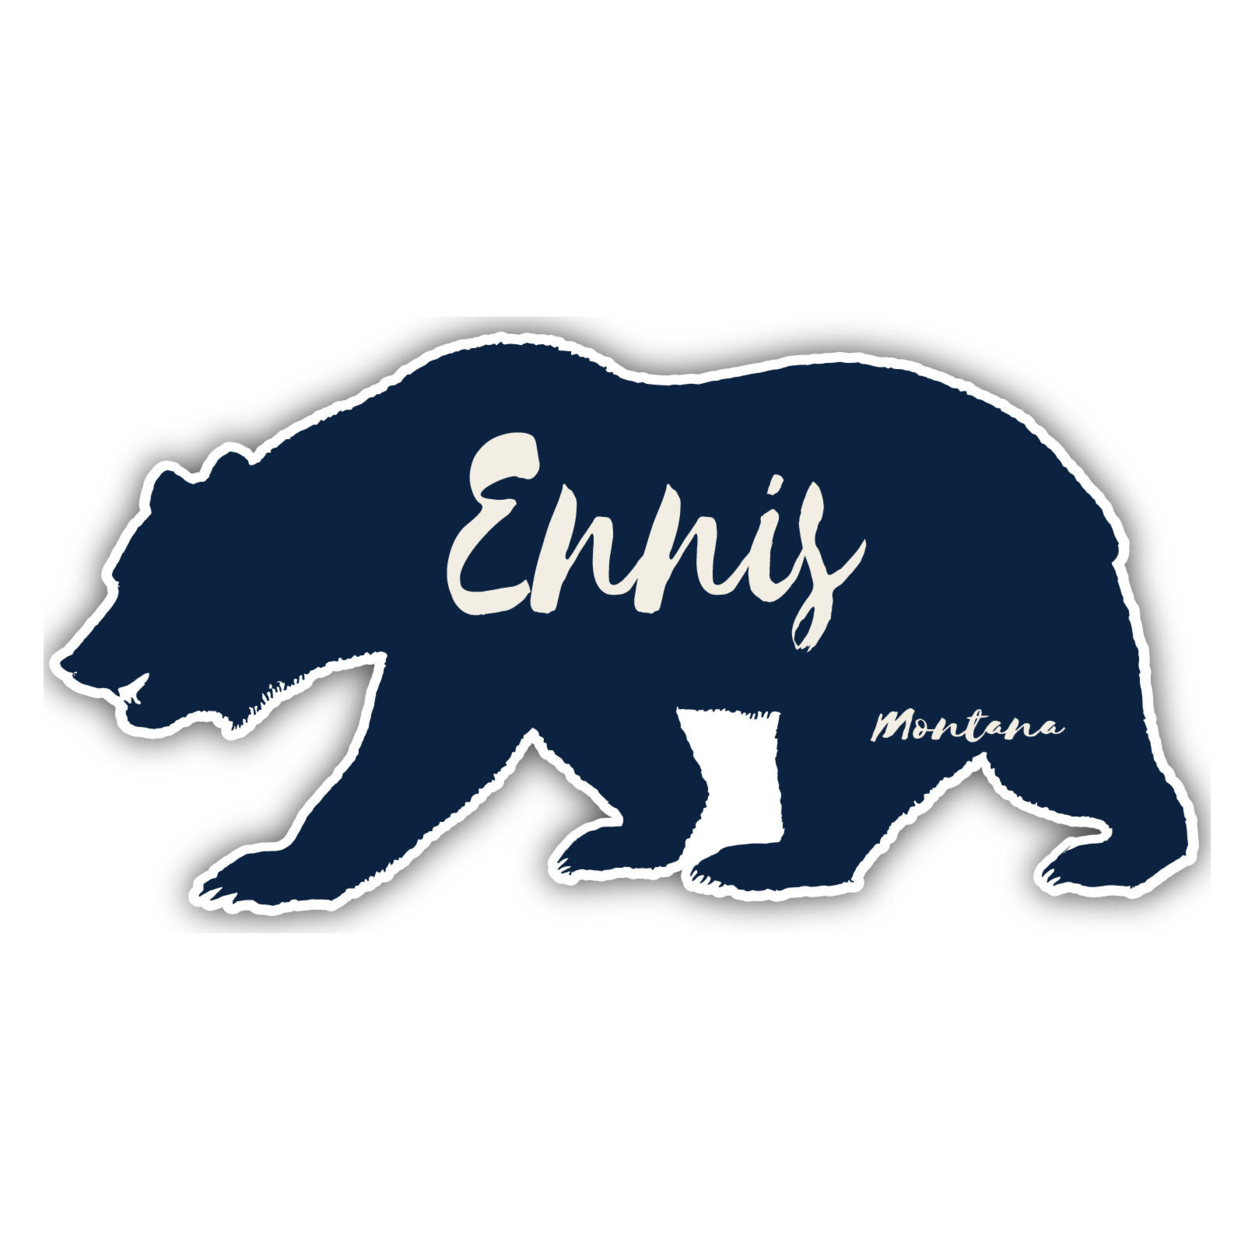 Ennis Montana Souvenir Decorative Stickers (Choose Theme And Size) - 4-Pack, 2-Inch, Great Outdoors